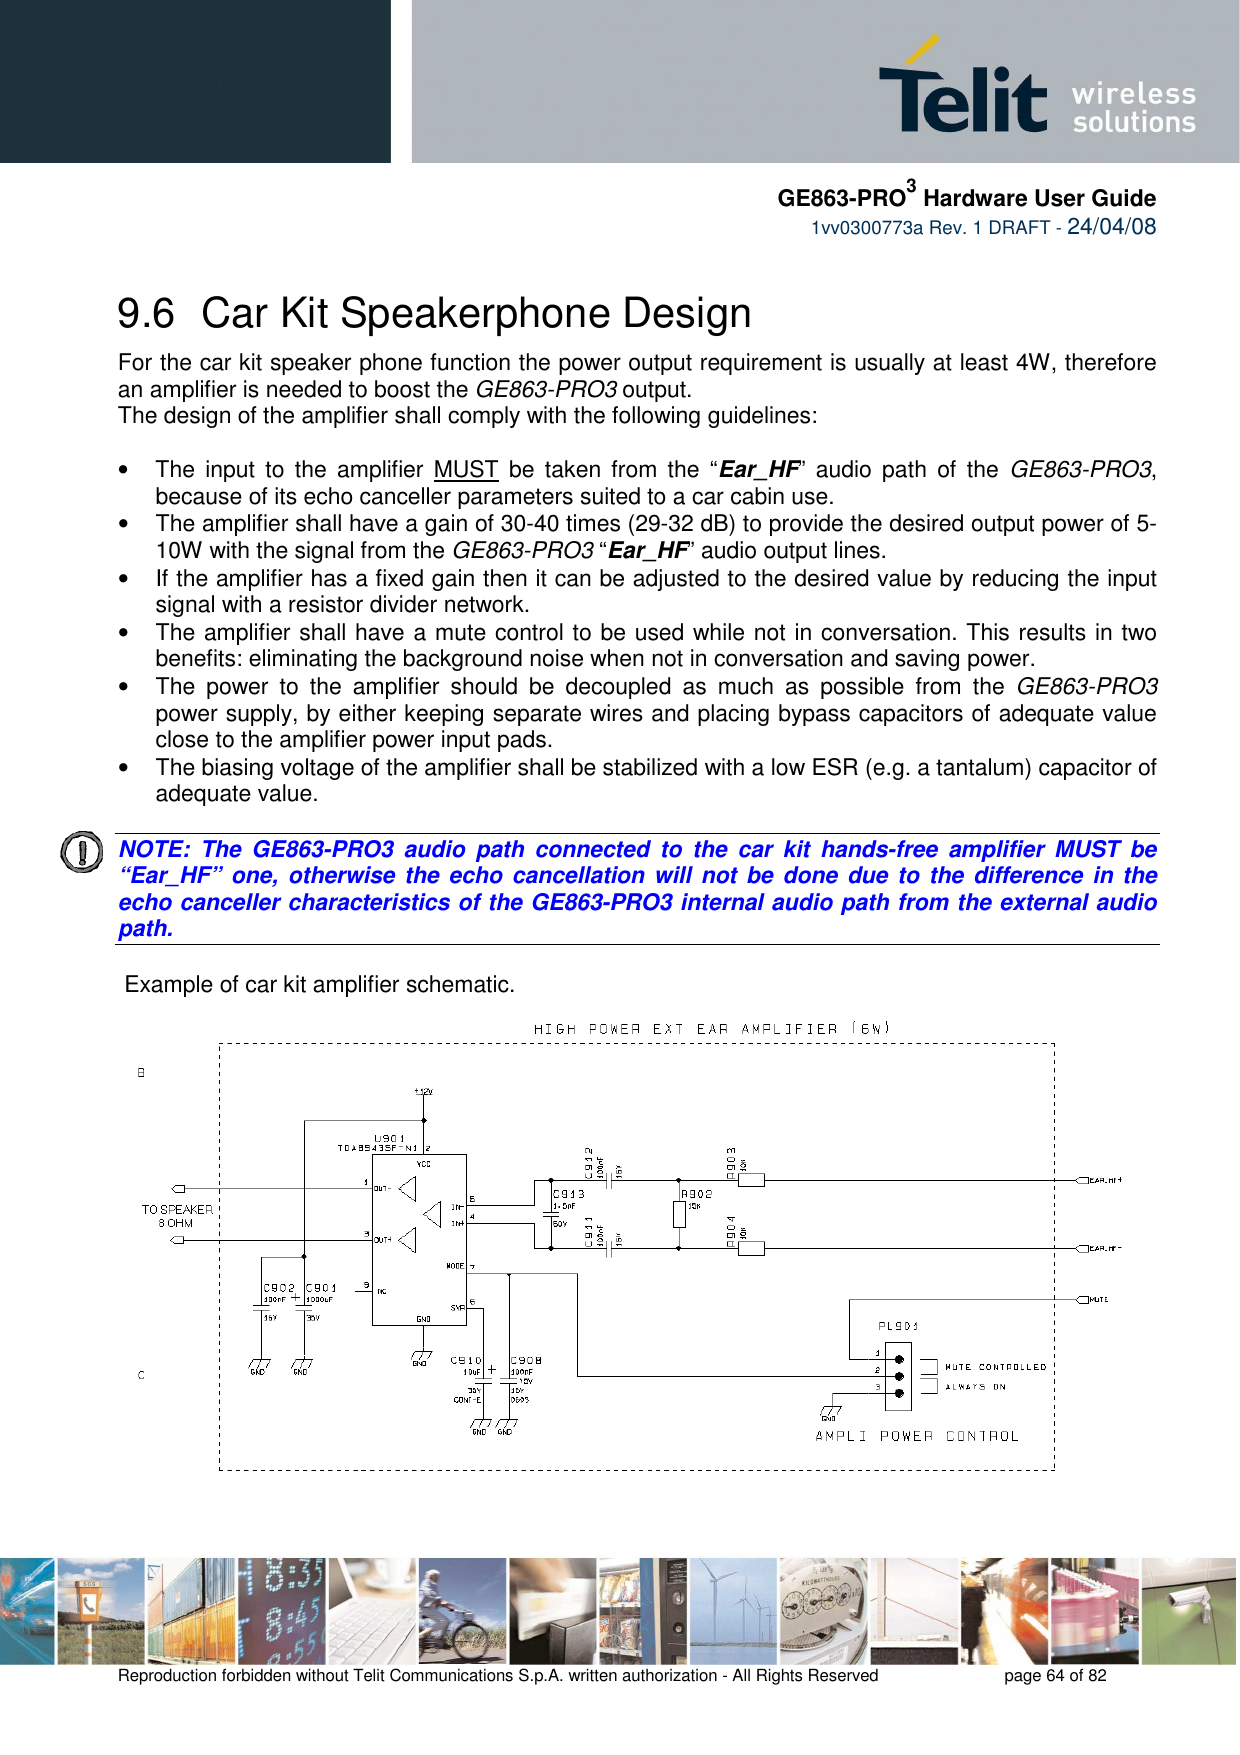     GE863-PRO3 Hardware User Guide  1vv0300773a Rev. 1 DRAFT - 24/04/08    Reproduction forbidden without Telit Communications S.p.A. written authorization - All Rights Reserved    page 64 of 82  9.6  Car Kit Speakerphone Design For the car kit speaker phone function the power output requirement is usually at least 4W, therefore an amplifier is needed to boost the GE863-PRO3 output. The design of the amplifier shall comply with the following guidelines:  •  The  input  to the  amplifier  MUST  be taken from the  “Ear_HF”  audio path  of  the  GE863-PRO3, because of its echo canceller parameters suited to a car cabin use. •  The amplifier shall have a gain of 30-40 times (29-32 dB) to provide the desired output power of 5-10W with the signal from the GE863-PRO3 “Ear_HF” audio output lines. •  If the amplifier has a fixed gain then it can be adjusted to the desired value by reducing the input signal with a resistor divider network. •  The amplifier shall have a mute control to be used while not in conversation. This results in two benefits: eliminating the background noise when not in conversation and saving power. •  The  power  to  the  amplifier  should  be  decoupled  as  much  as  possible  from  the  GE863-PRO3 power supply, by either keeping separate wires and placing bypass capacitors of adequate value close to the amplifier power input pads. •  The biasing voltage of the amplifier shall be stabilized with a low ESR (e.g. a tantalum) capacitor of adequate value.   NOTE:  The  GE863-PRO3  audio  path  connected  to  the  car  kit  hands-free  amplifier  MUST  be “Ear_HF” one, otherwise the echo cancellation will not  be done due to  the difference in the echo canceller characteristics of the GE863-PRO3 internal audio path from the external audio path.     Example of car kit amplifier schematic. 